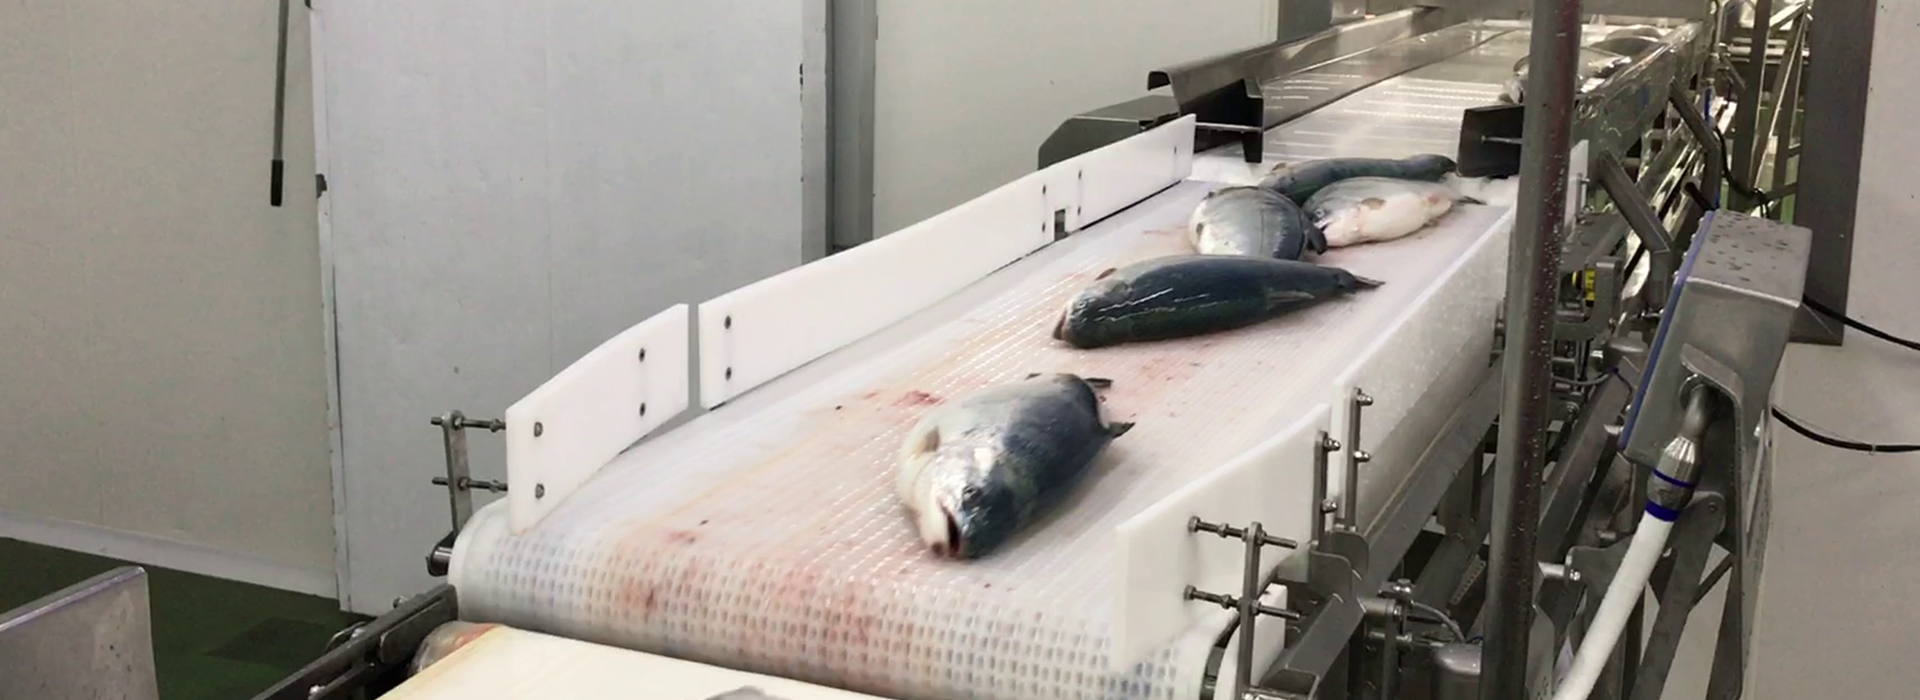 Flowscale dynamic weighing of fish product streams